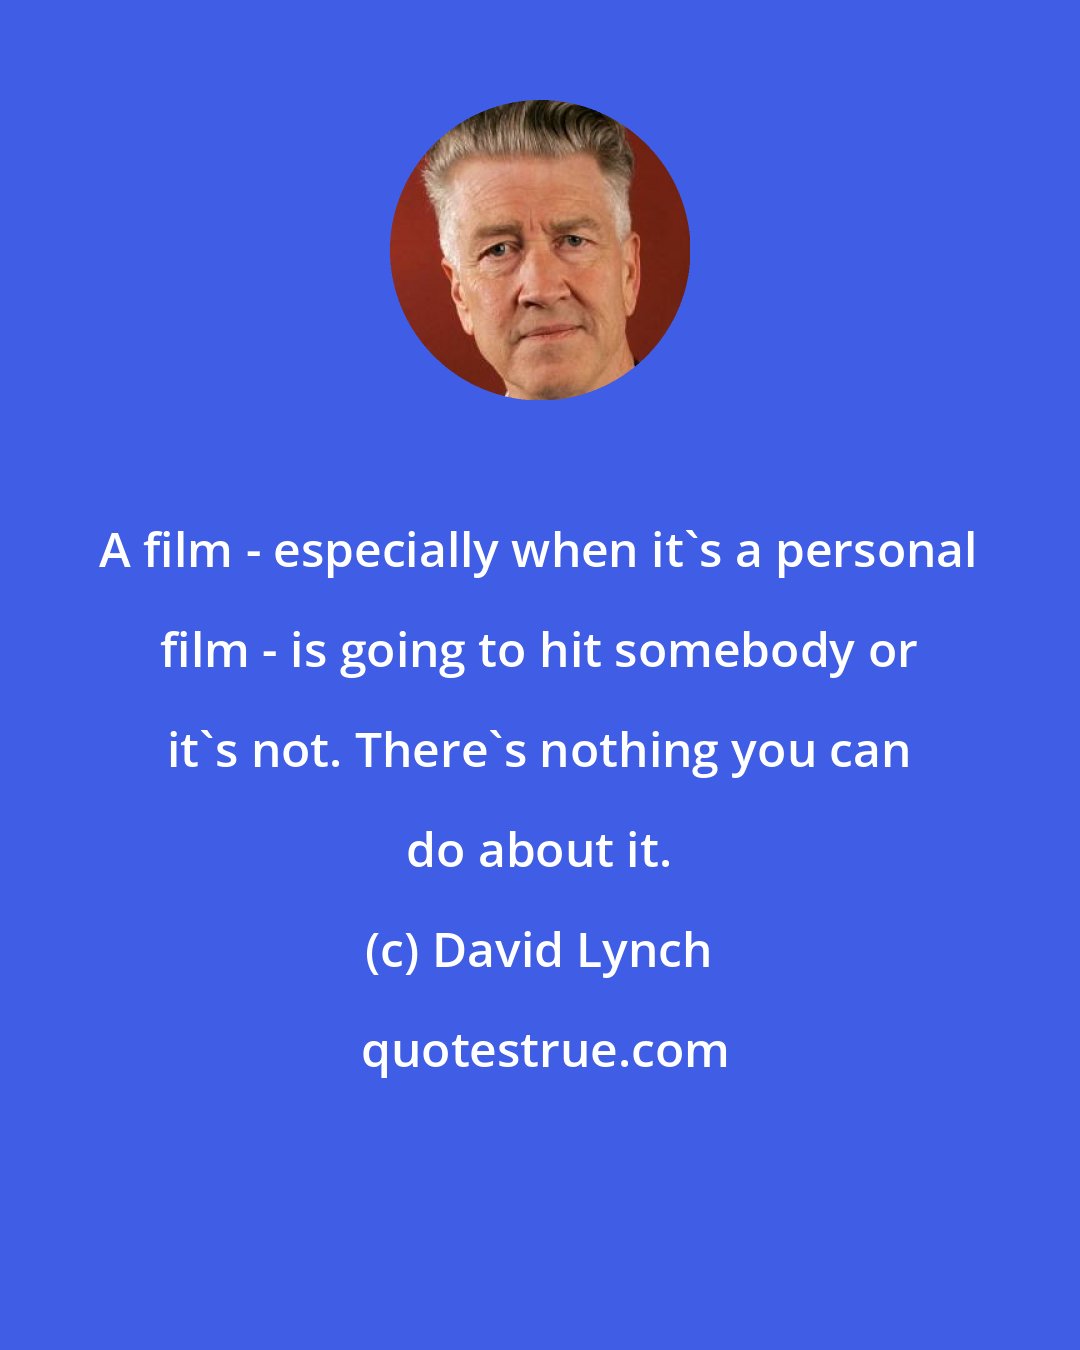 David Lynch: A film - especially when it's a personal film - is going to hit somebody or it's not. There's nothing you can do about it.